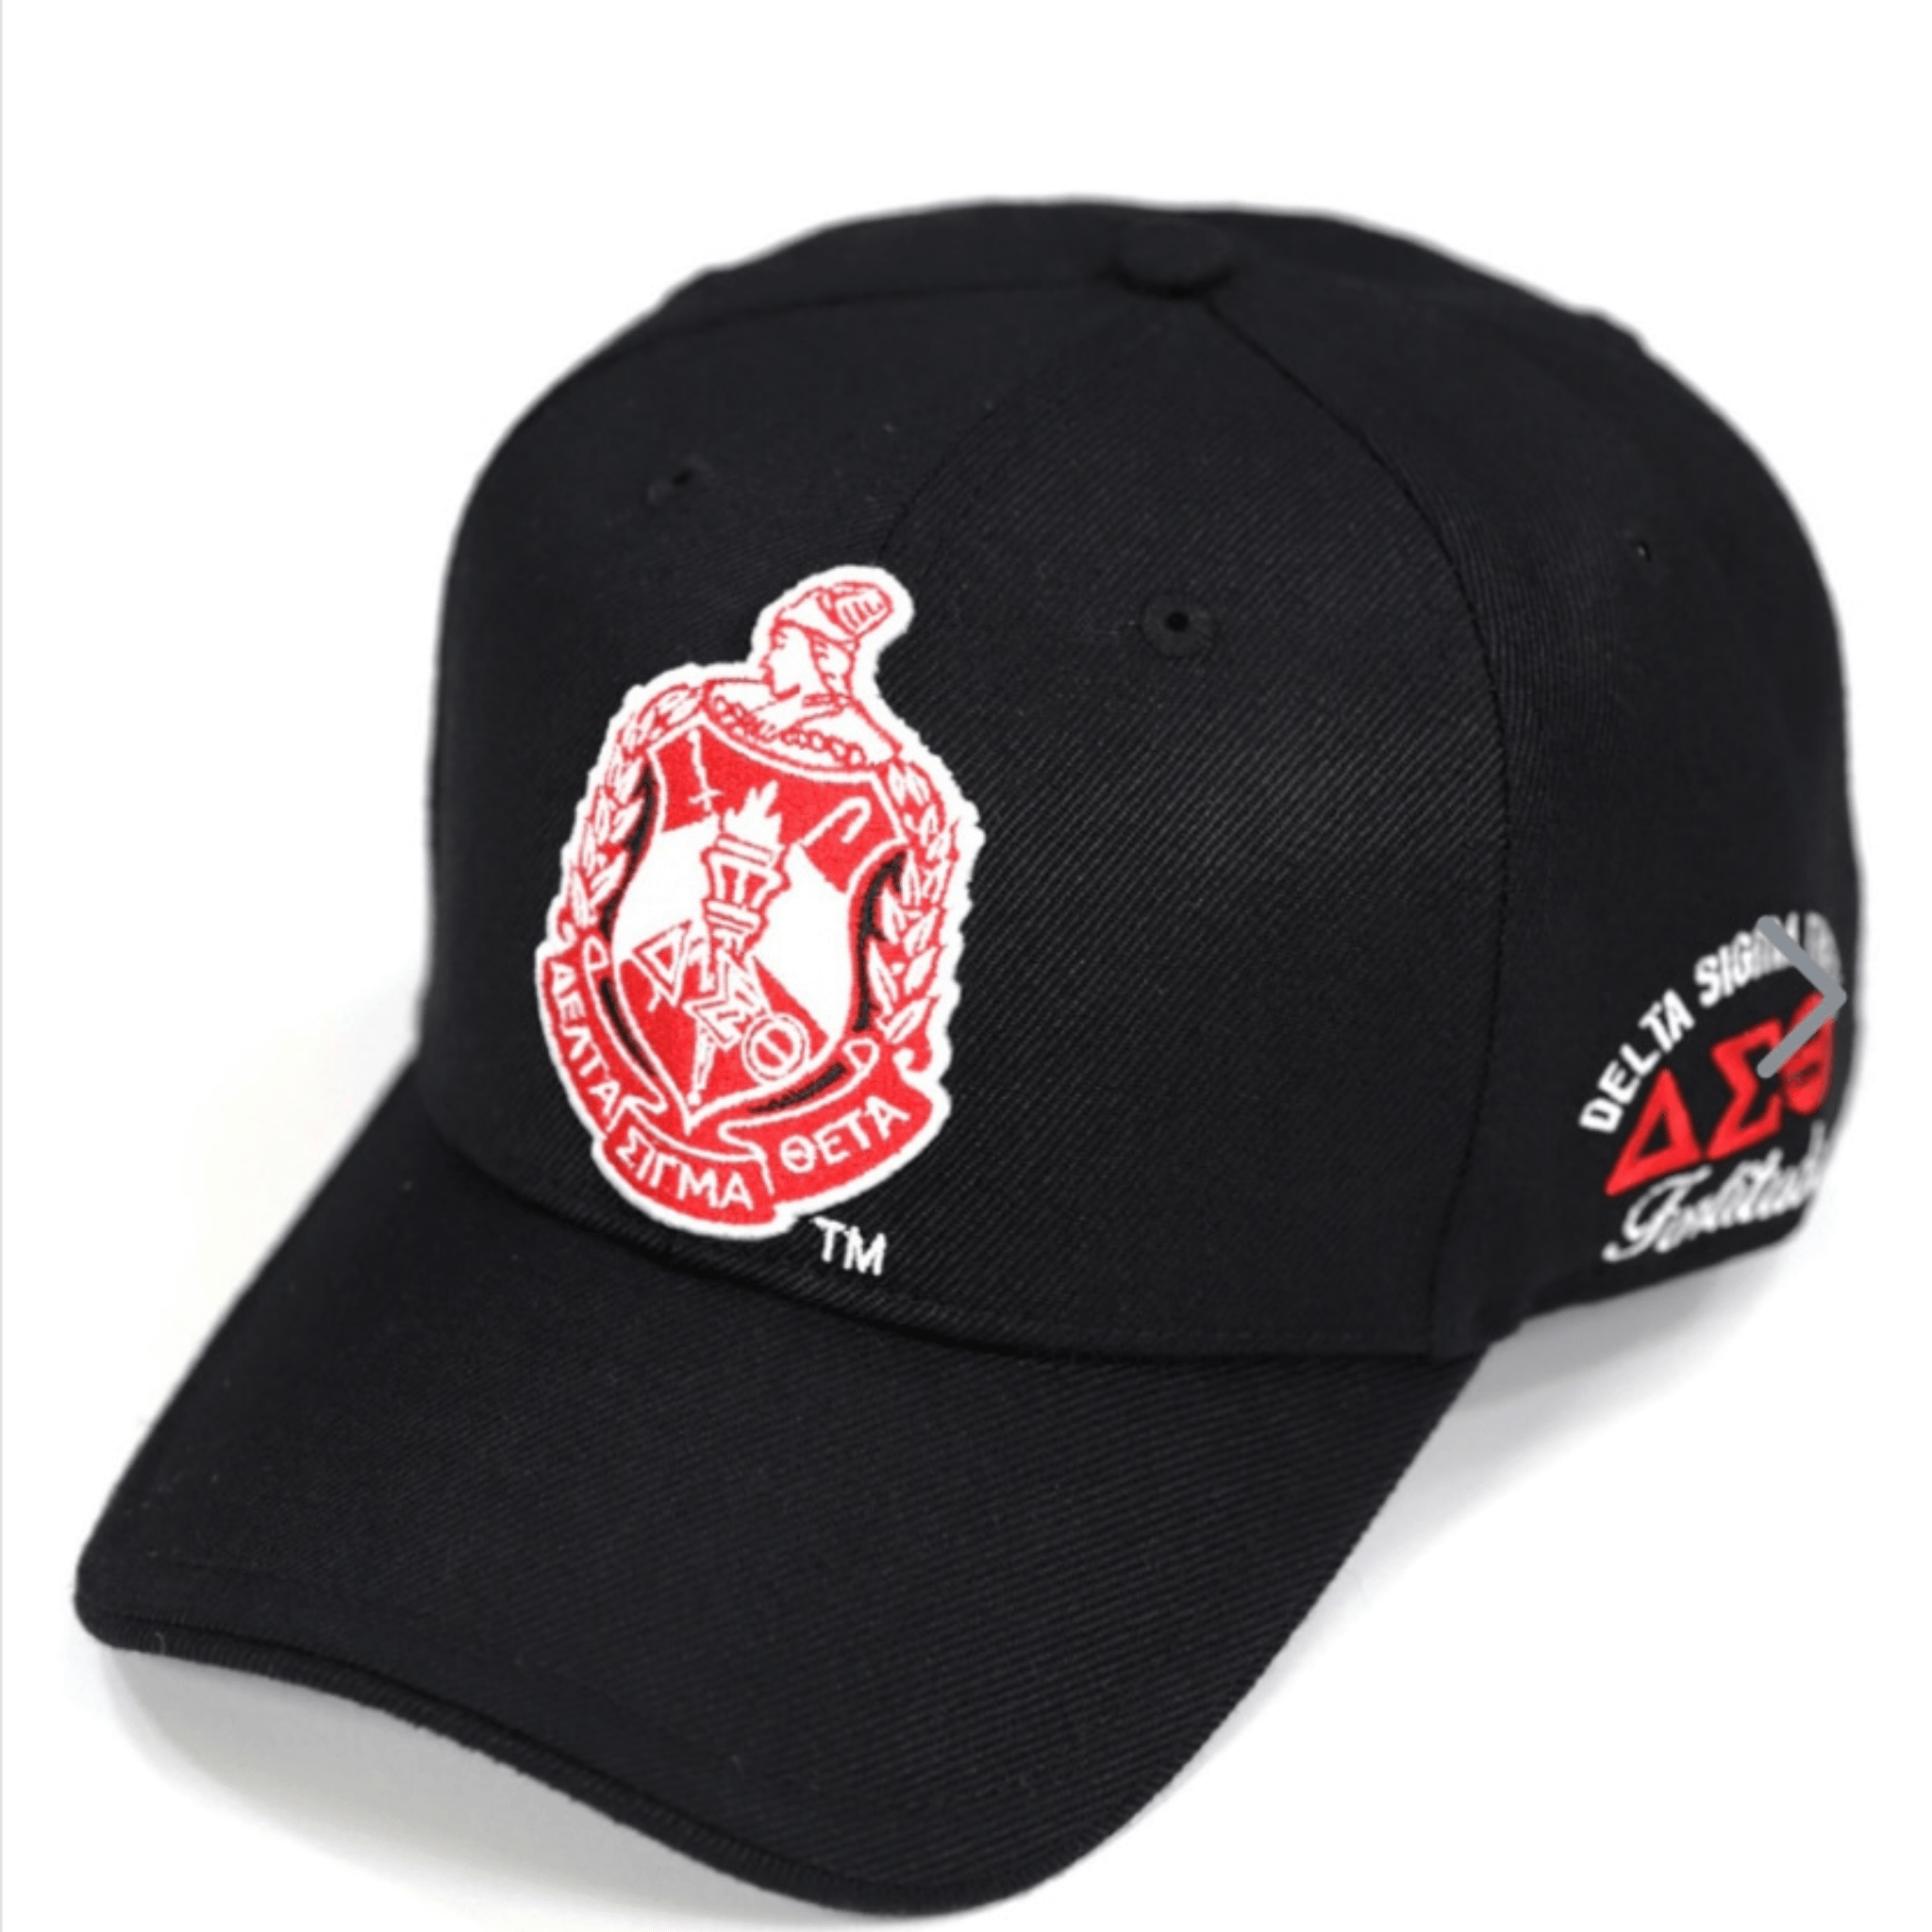 Black Cap With DST Embroidered Sorority Crest